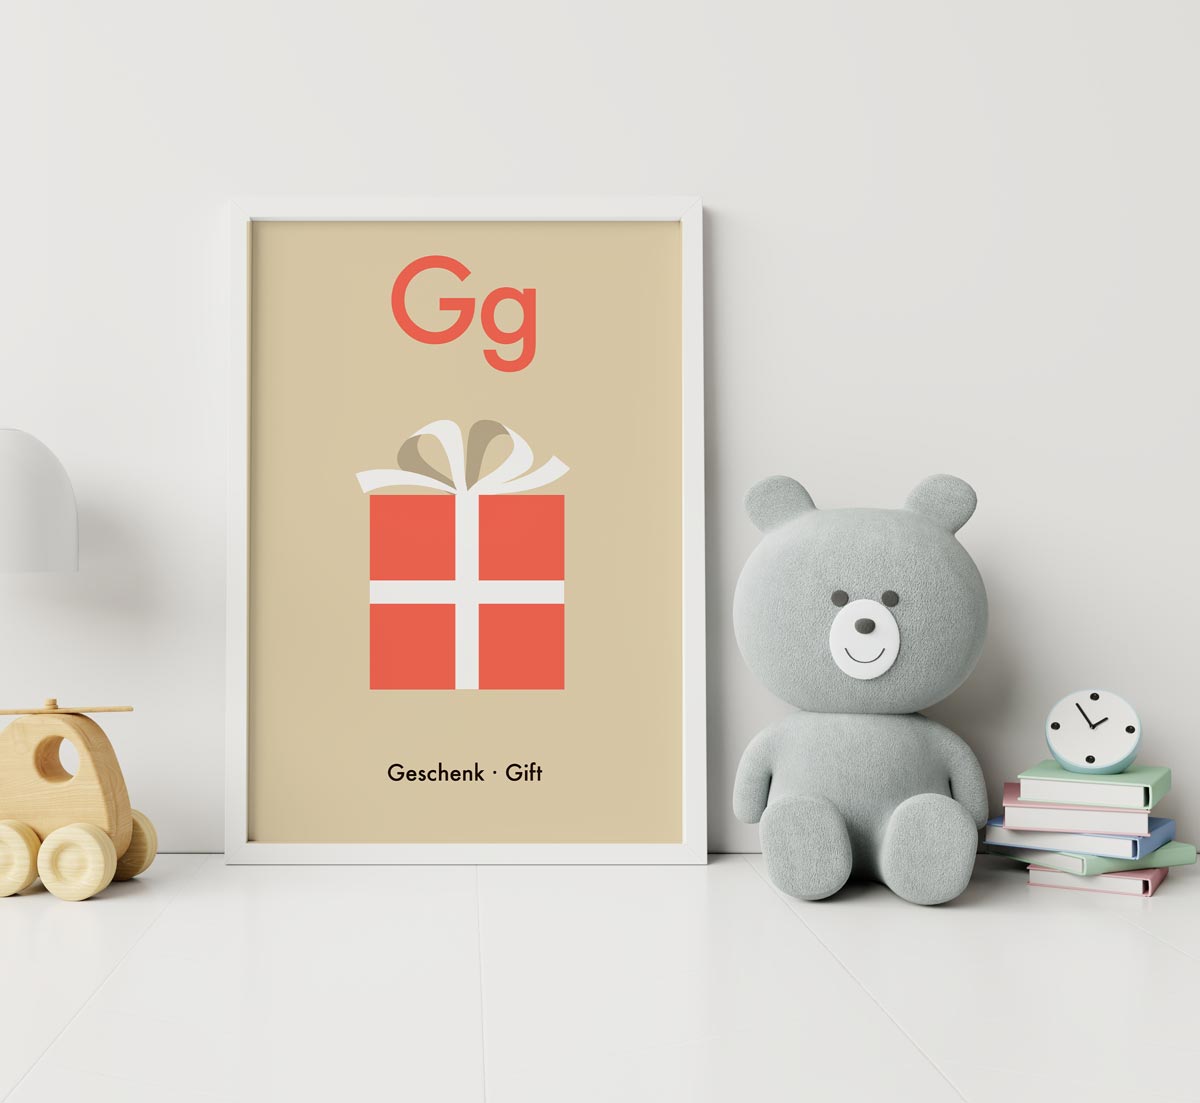 G for Gift - Children's Alphabet Poster in German and English